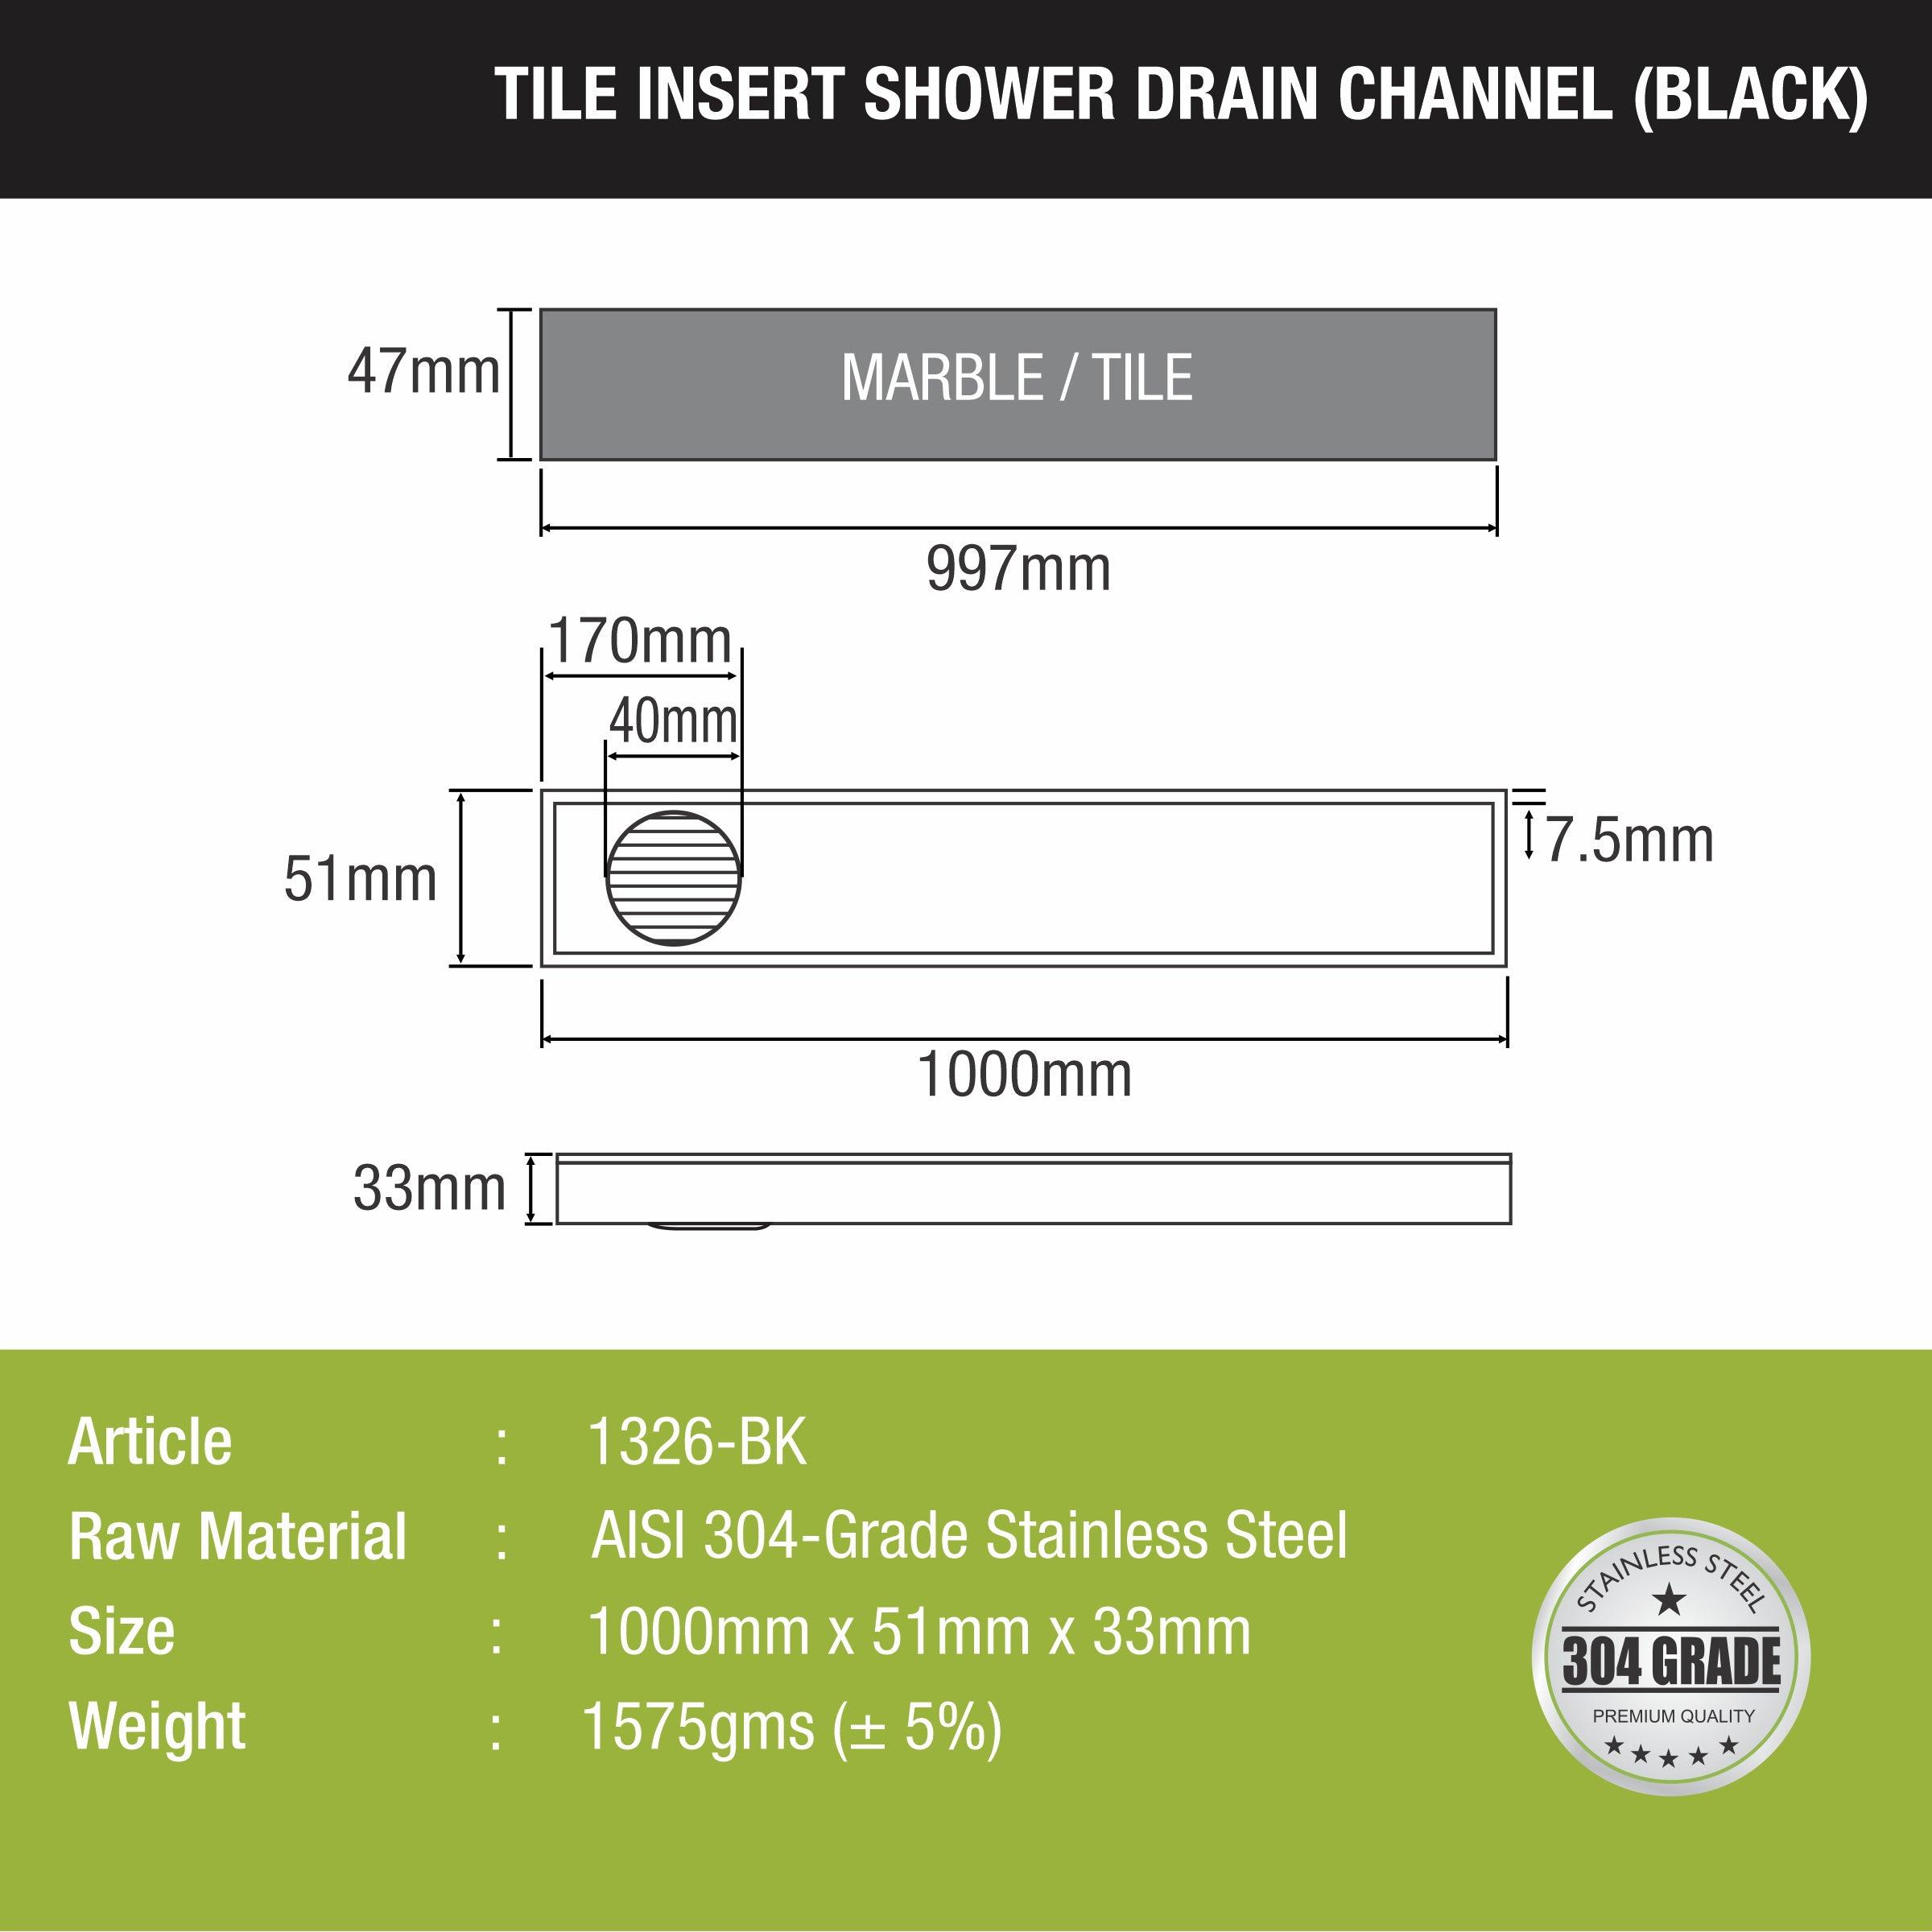 Tile Insert Shower Drain Channel - Black (40 x 2 Inches)  size and measurement 